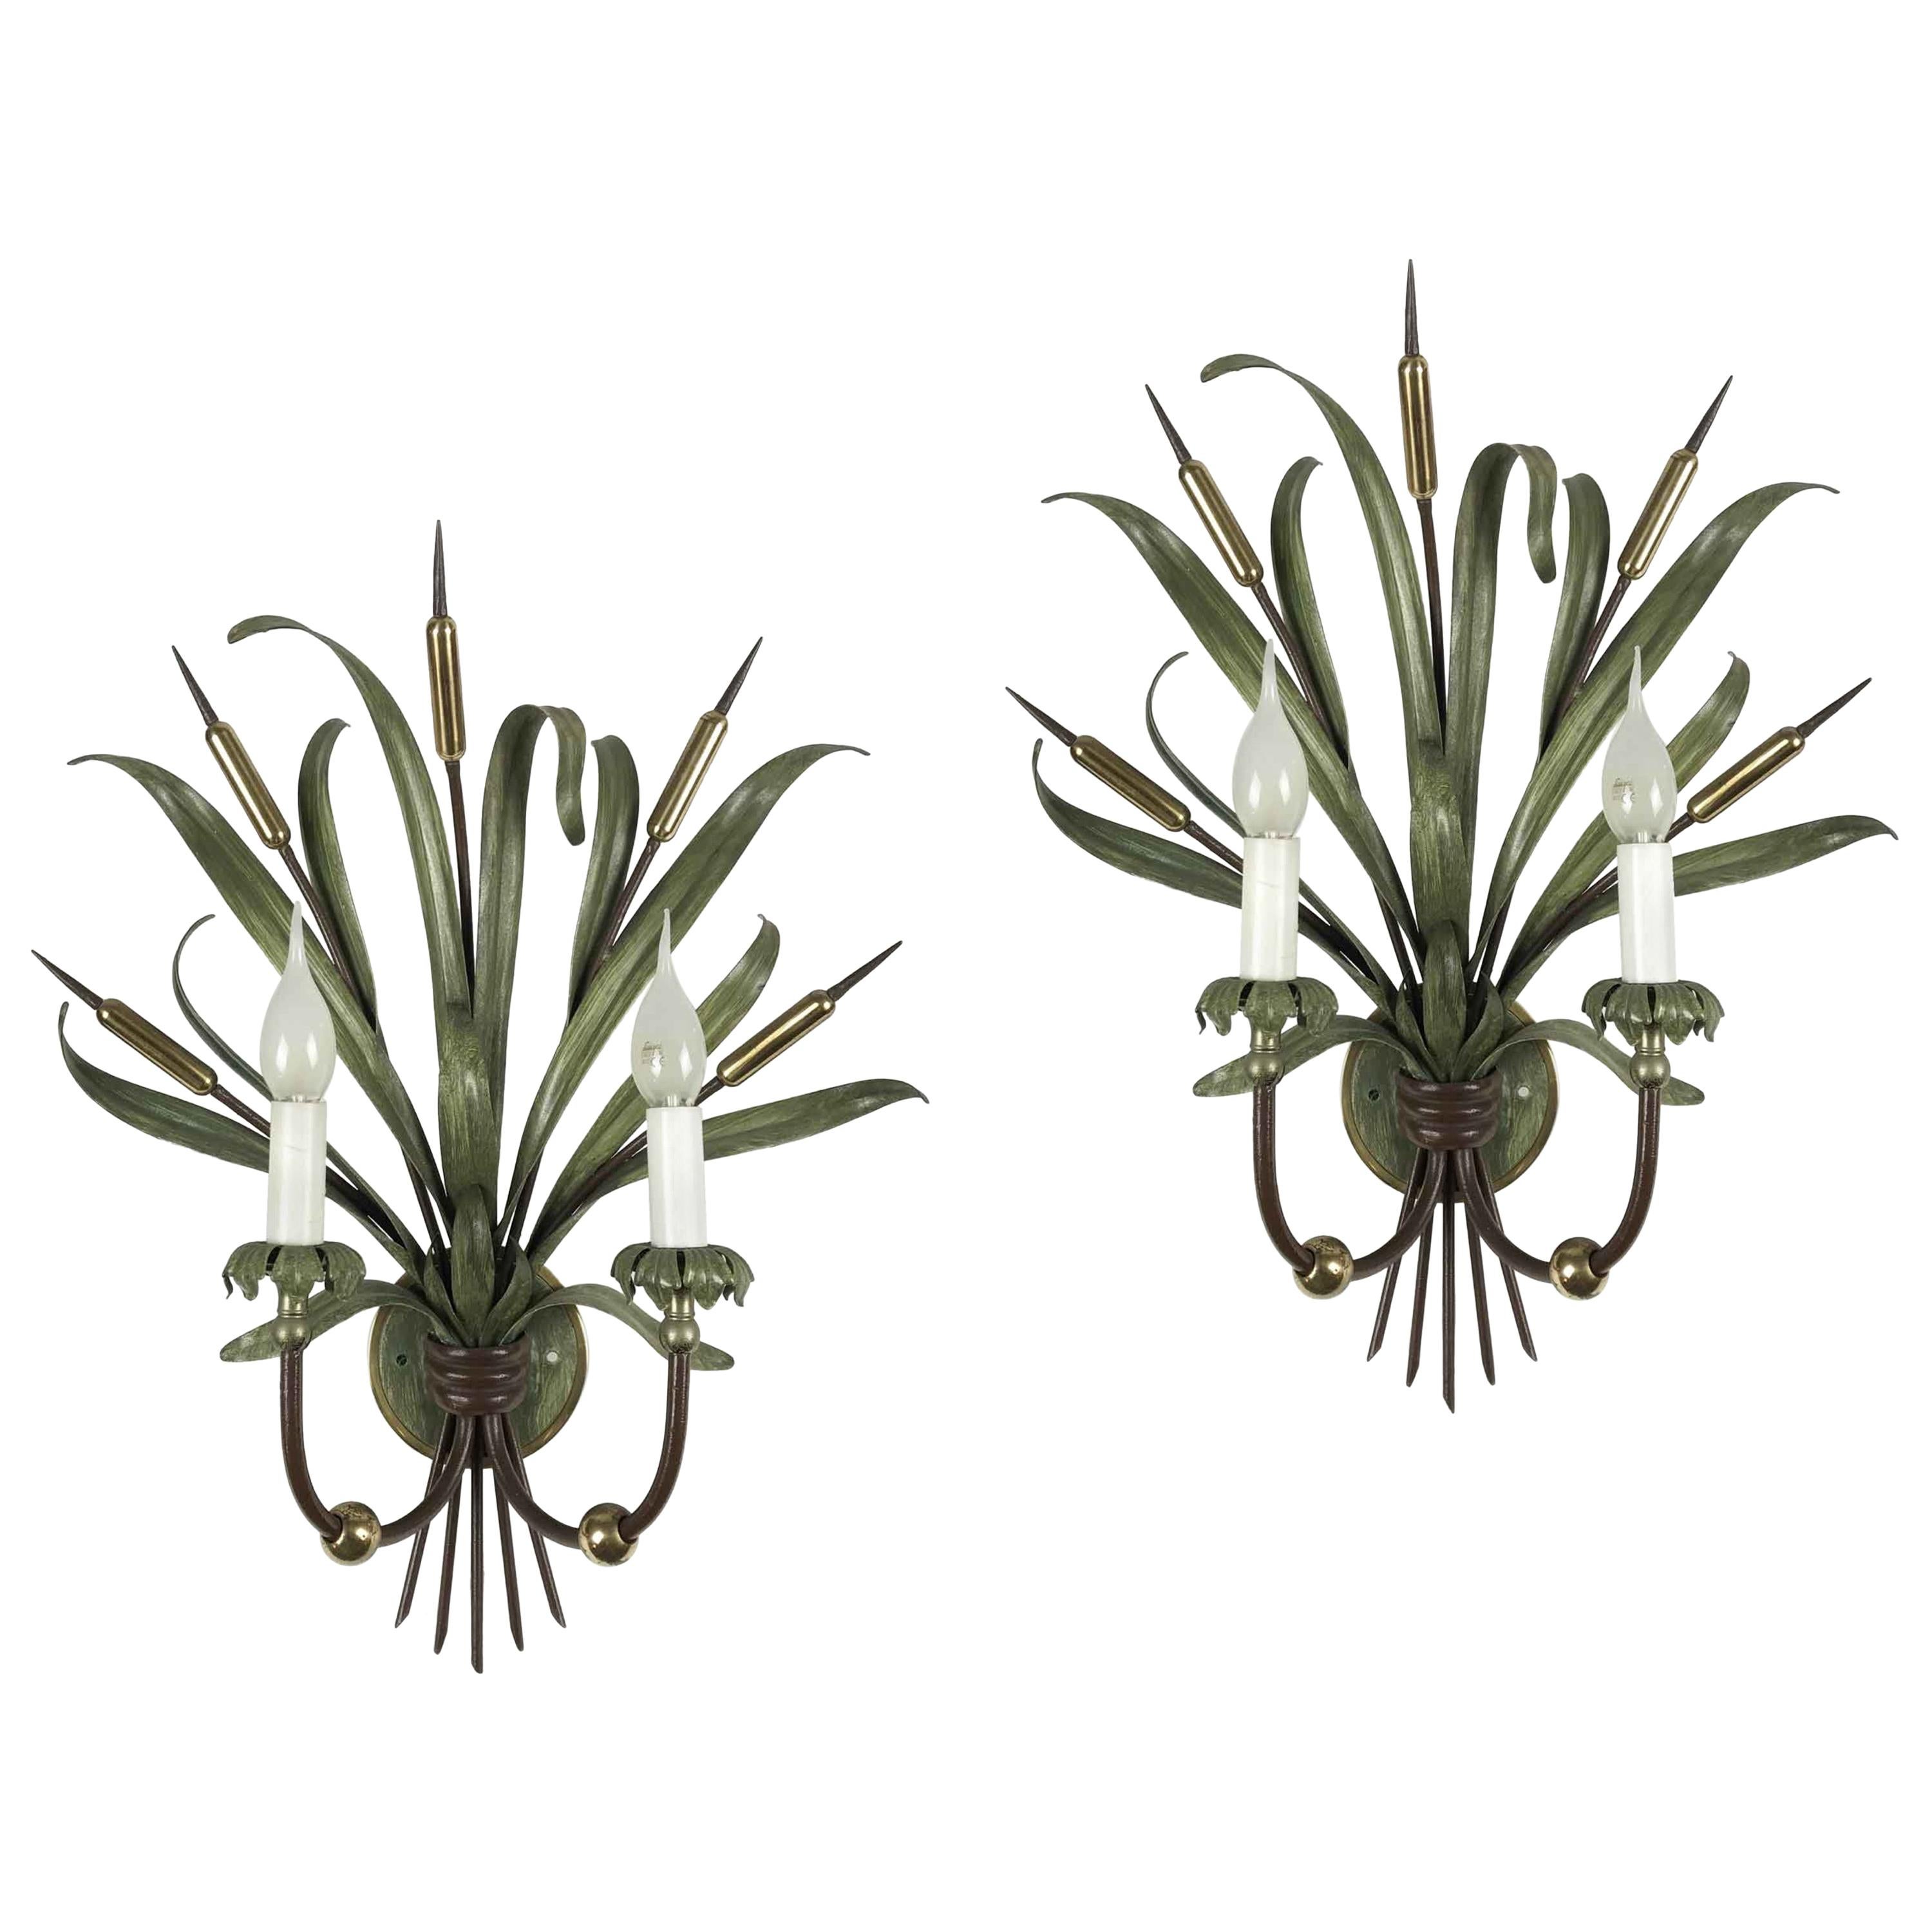 Pair of Italian Sconces by Banci Firenze 1980 circa with Green Reed Bunches 